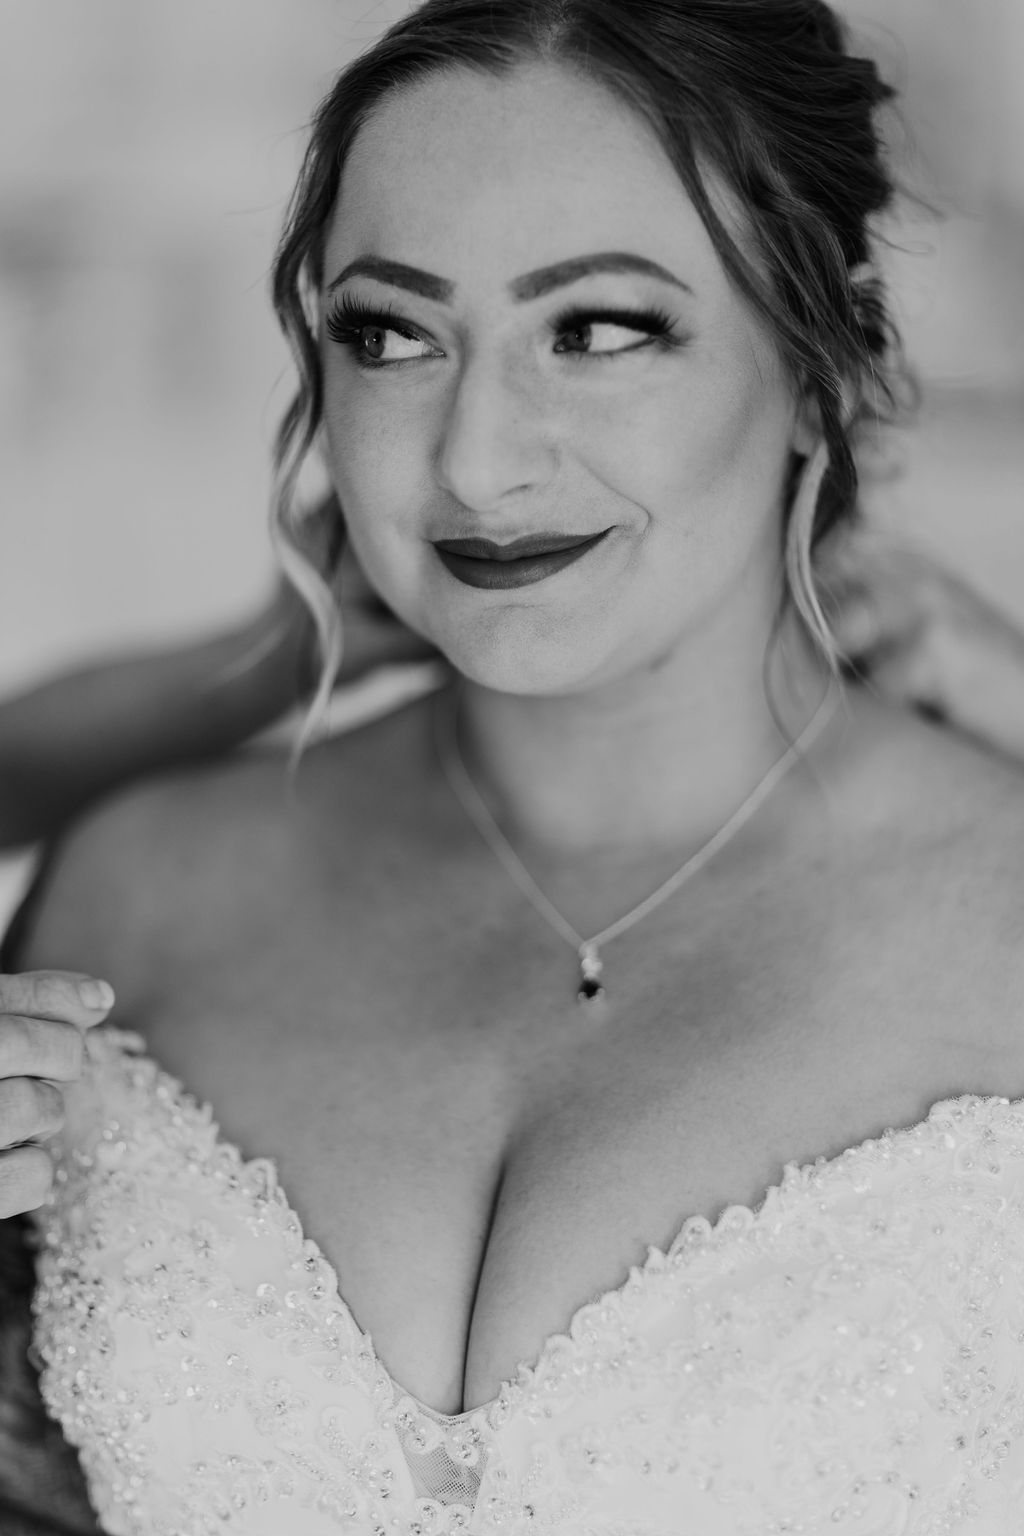 A close-up of the bride smiling while getting ready for the wedding.